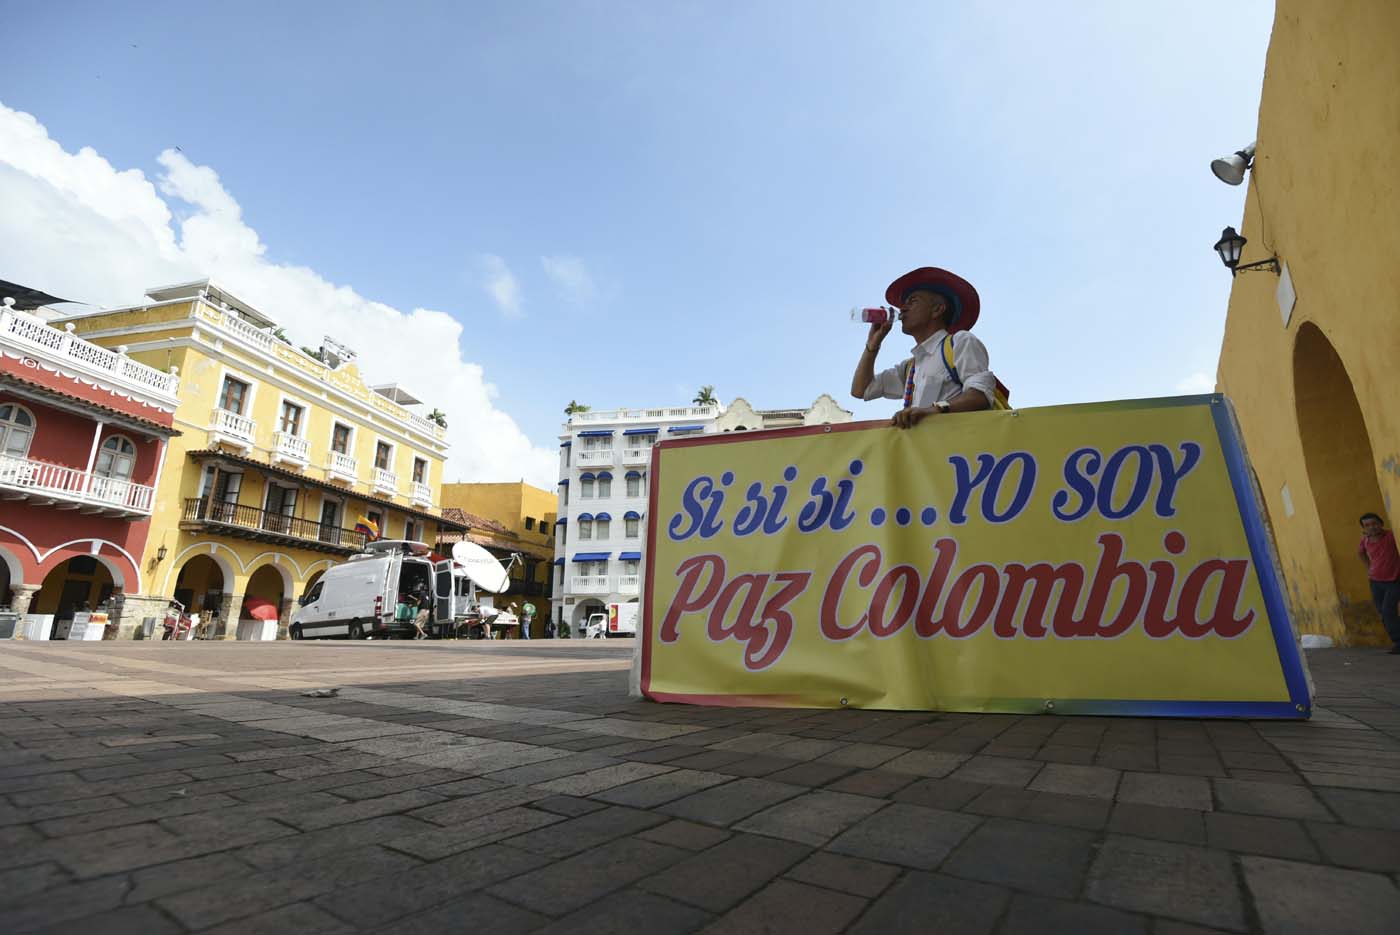 Colombian Paz Colombia Duque, (his name Paz Colombia could be translated as "Peace Colombia"), is photographed in Cartagena, Colombia on September 25, 2016. The placard reads "Yes yes Yes...I Am Paz Colombia". On Monday September 26, 2016 Colombian President Juan Manuel Santos and the leader of the Revolutionary Armed Forces of Colombia (FARC), Rodrigo Londoño - known by his noms de guerre Timoleon Jimenez or Timoshenko - will officially sign a peace agreement in the Cartagena Convention Center to end an armed conflict that has bled the country for over half a century. / AFP PHOTO / LUIS ROBAYO